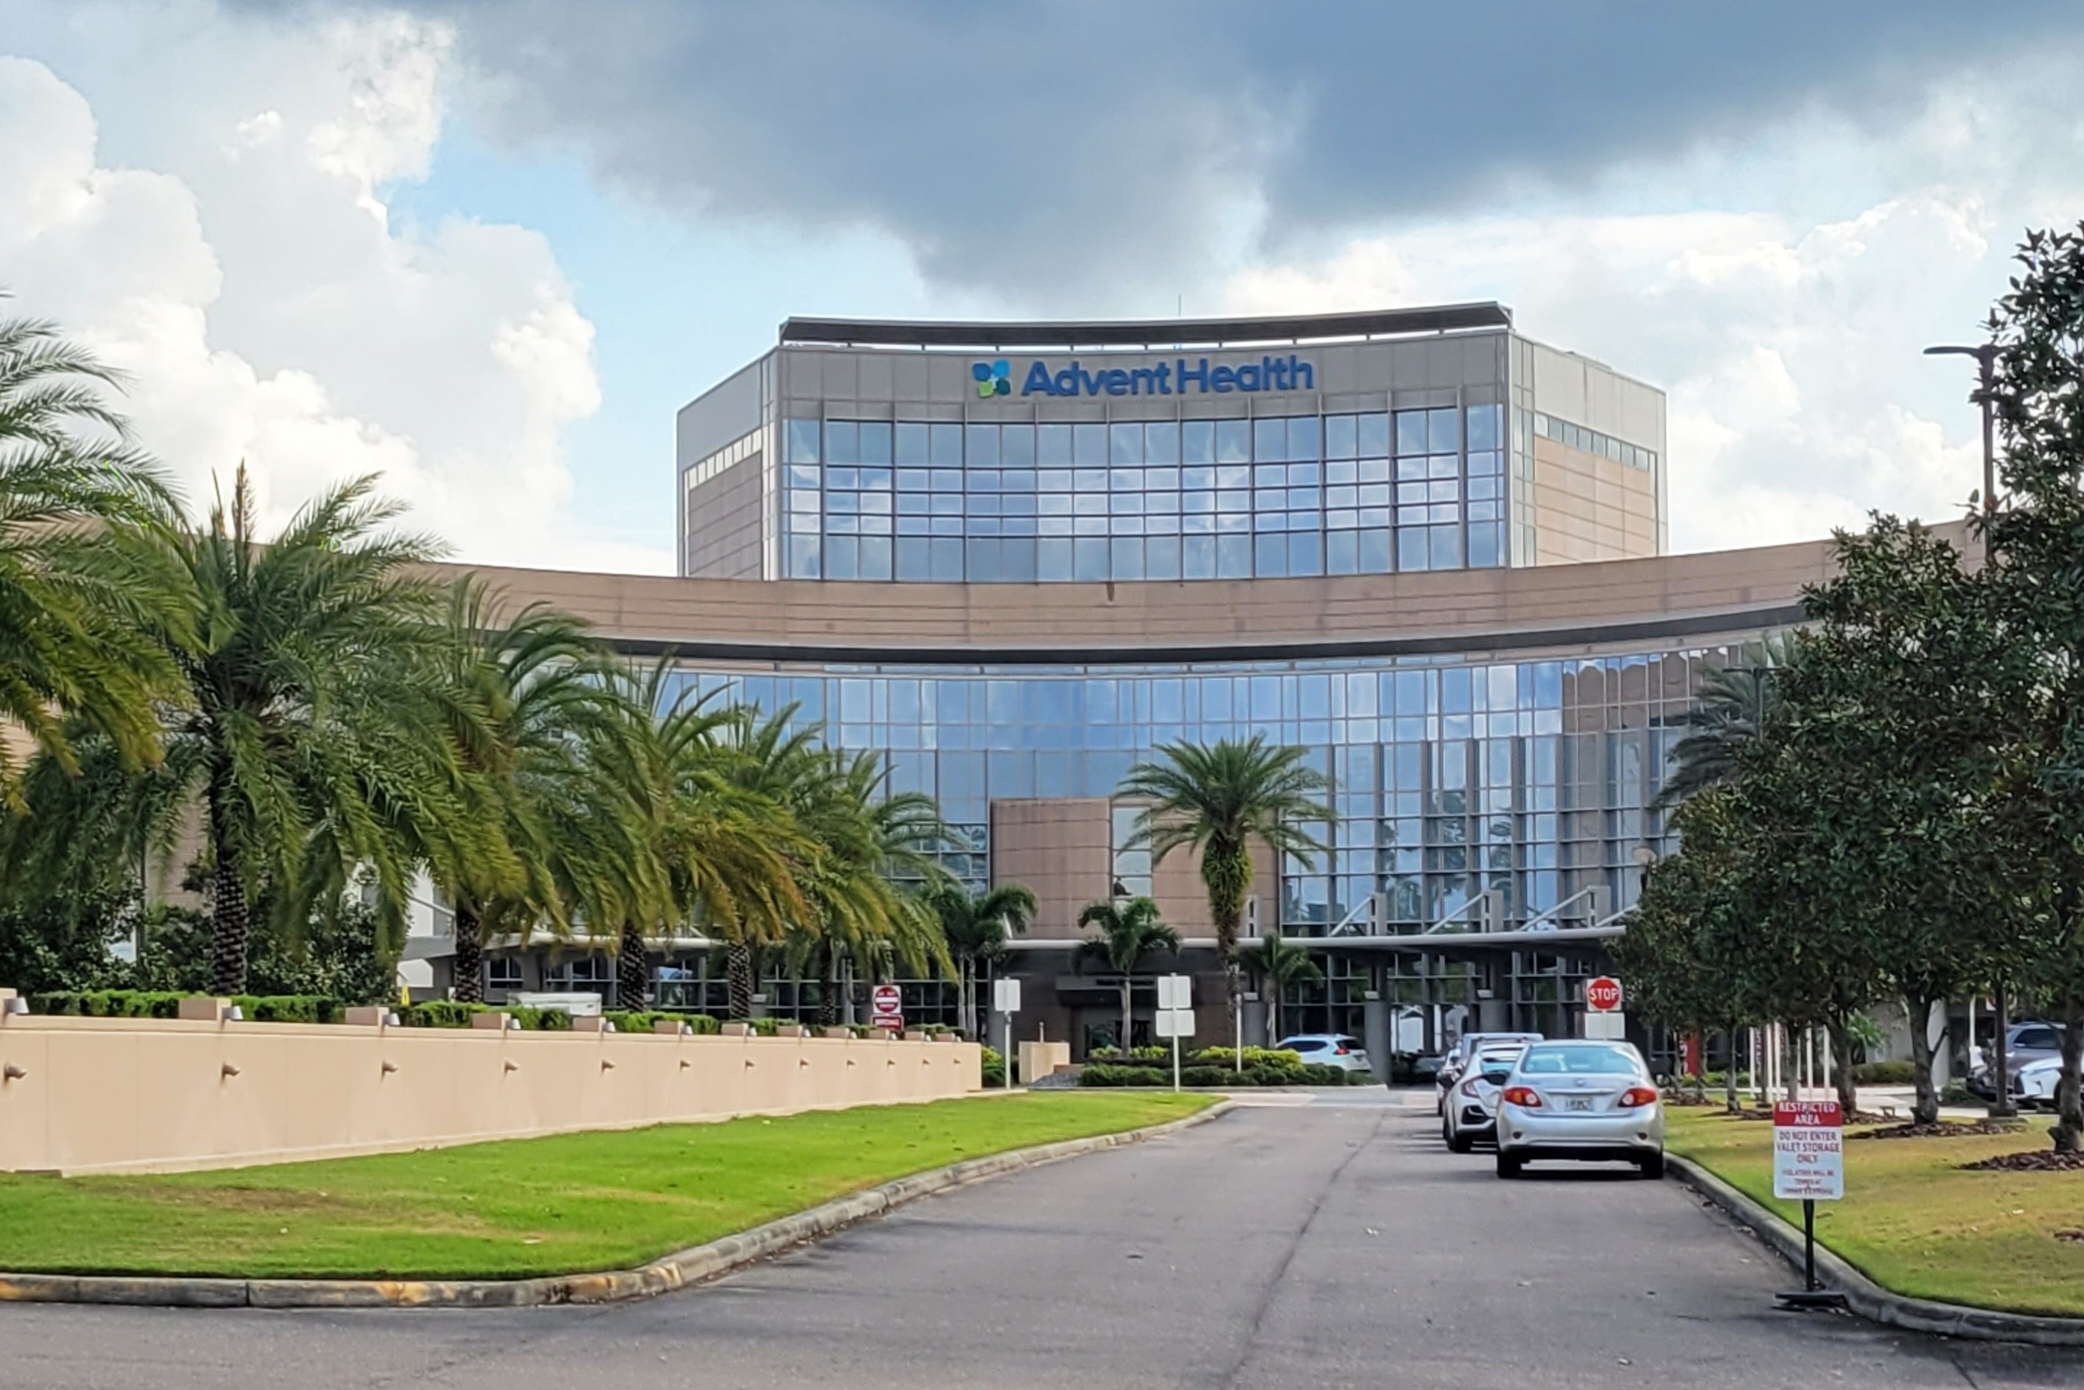 A photo of the hospital with the AdventHealth logo.